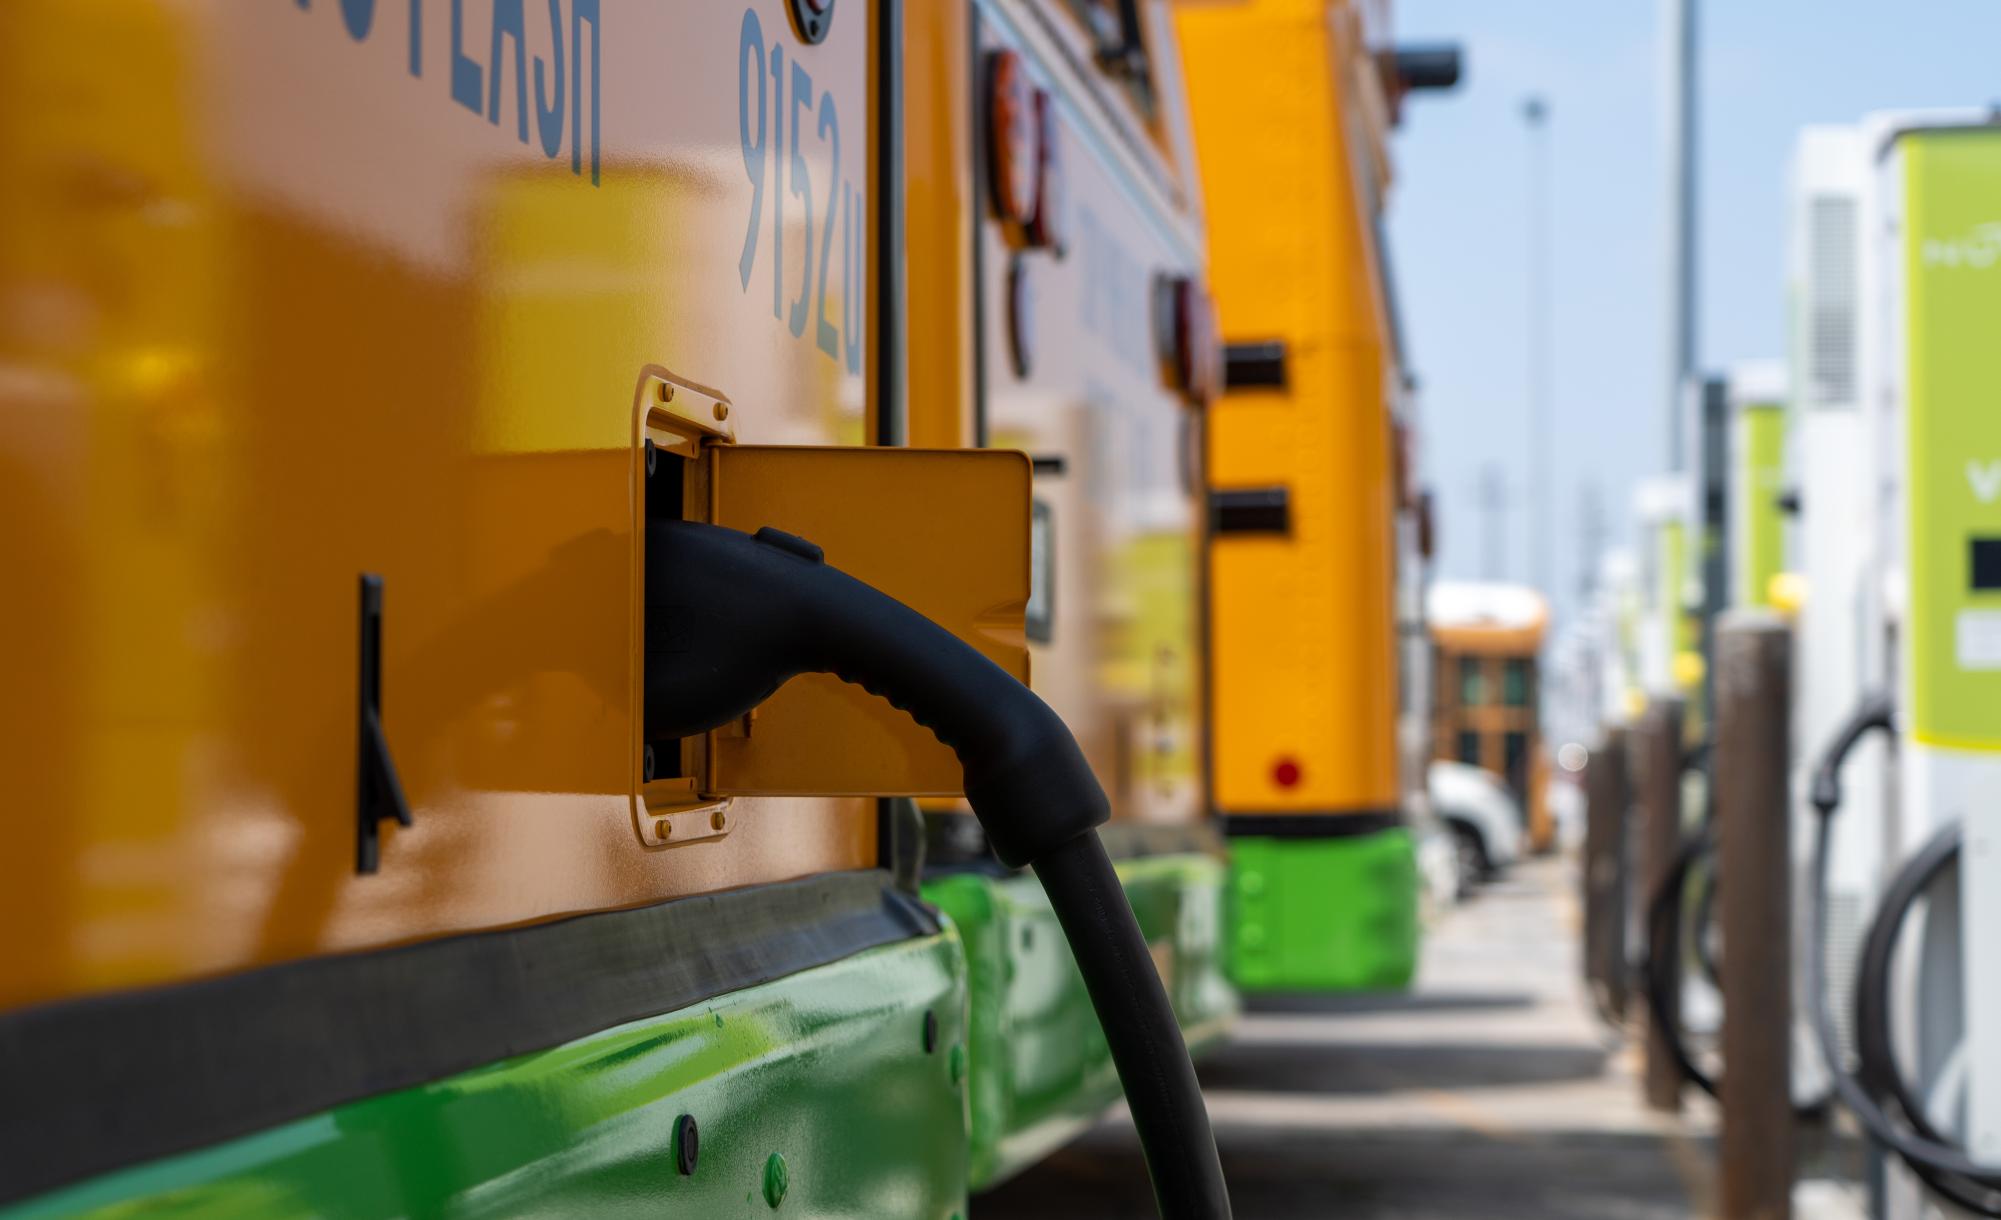 PLUGGING IN: One of the districts new electric school buses recharges at one of the 18 new charging stations that were recently installed at the Gardena Bus Yard in South L.A. LAUSD plans to completely electrify the fleet stationed in Sun Valley by 2026 by adding 180 new electric buses.